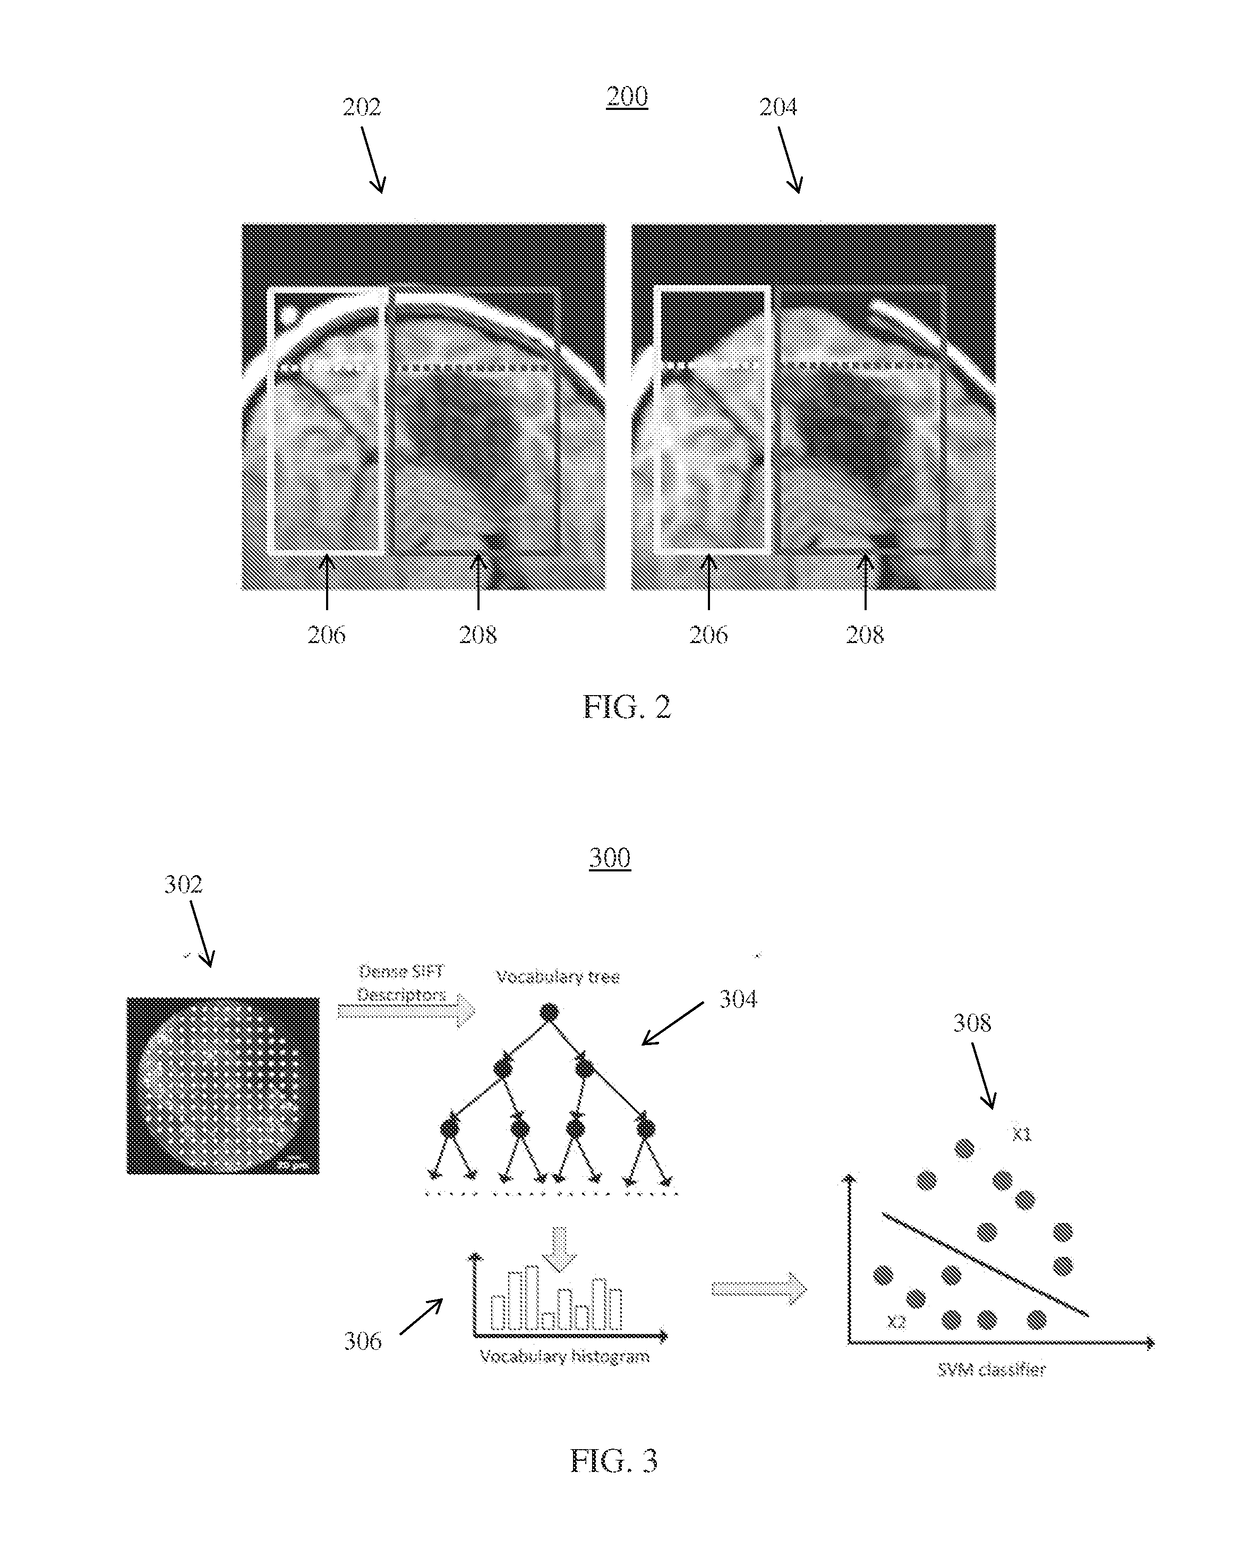 A system and method for surgical guidance and intra-operative pathology through endo-microscopic tissue differentiation